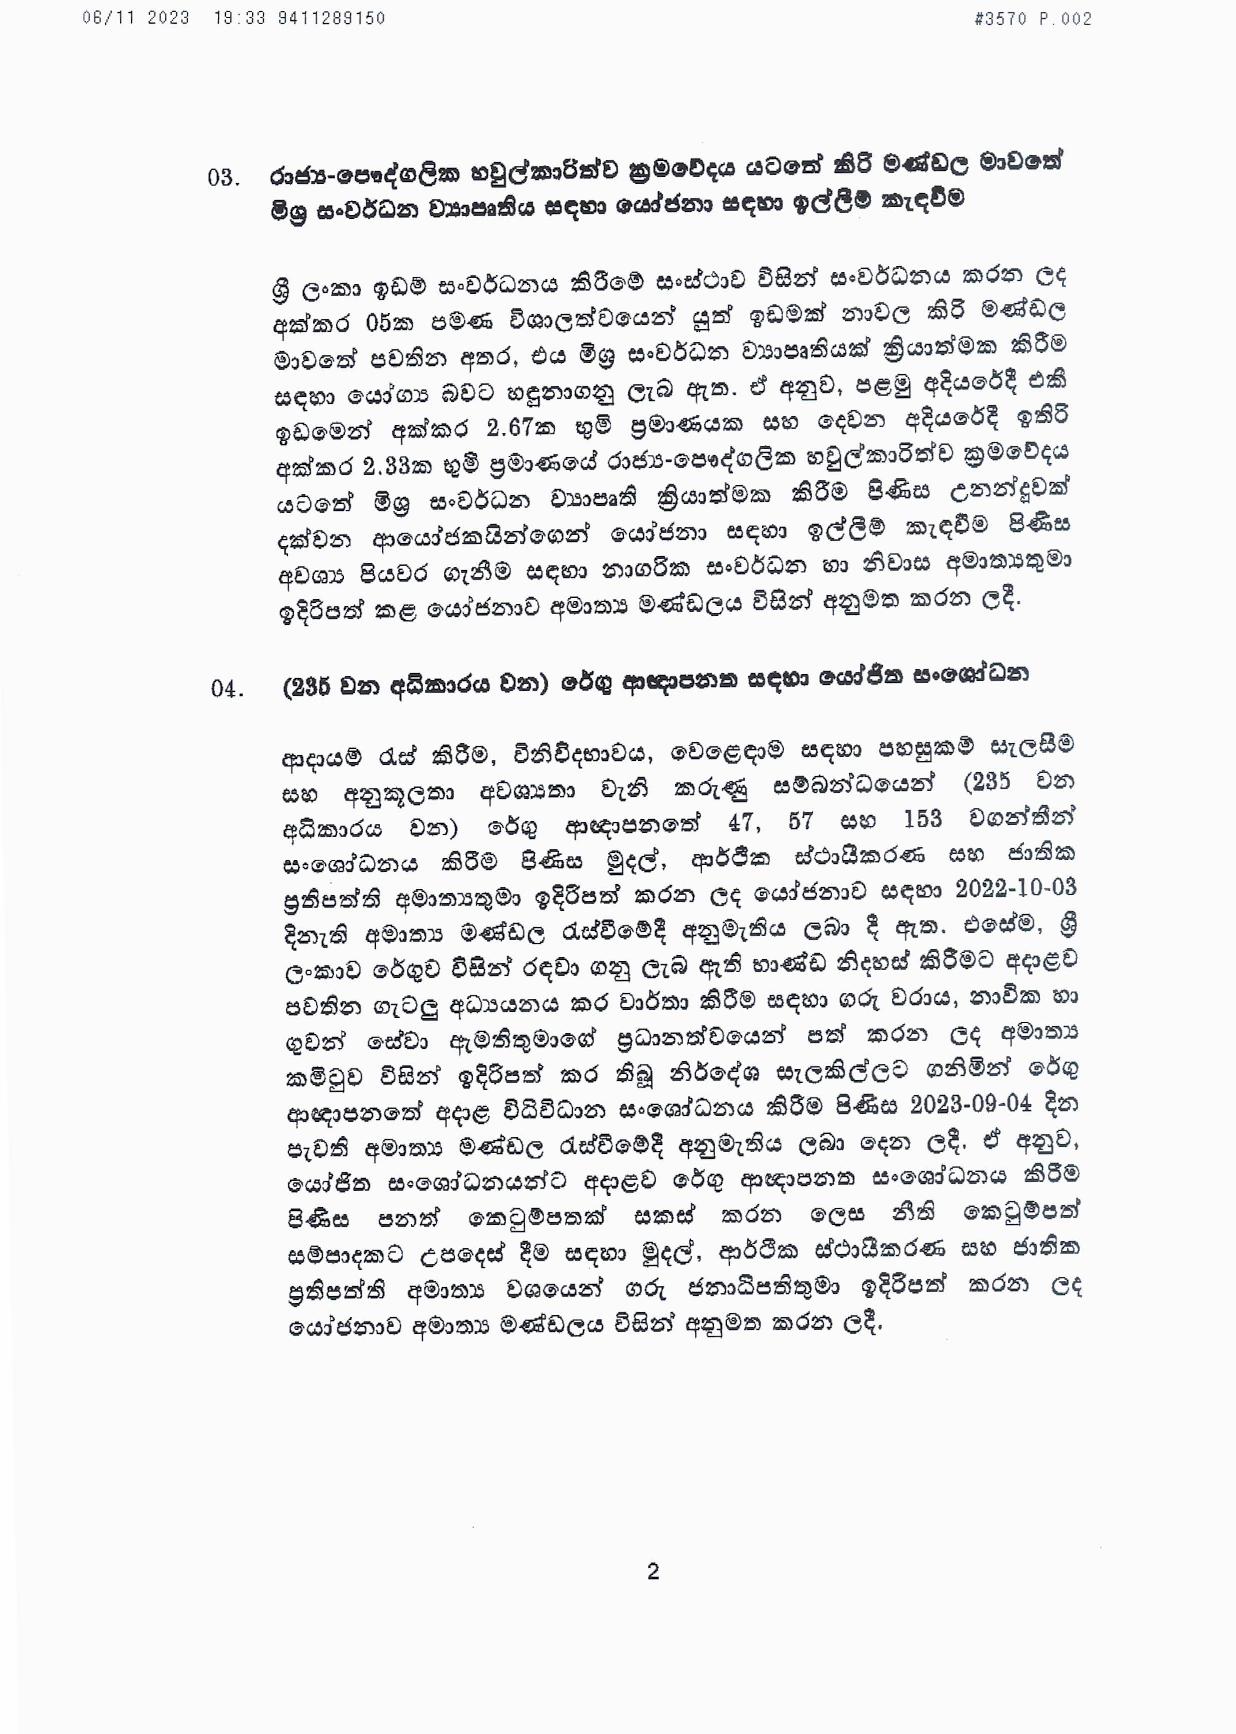 Cabinet Decision on 06.11.2023 1 page 002